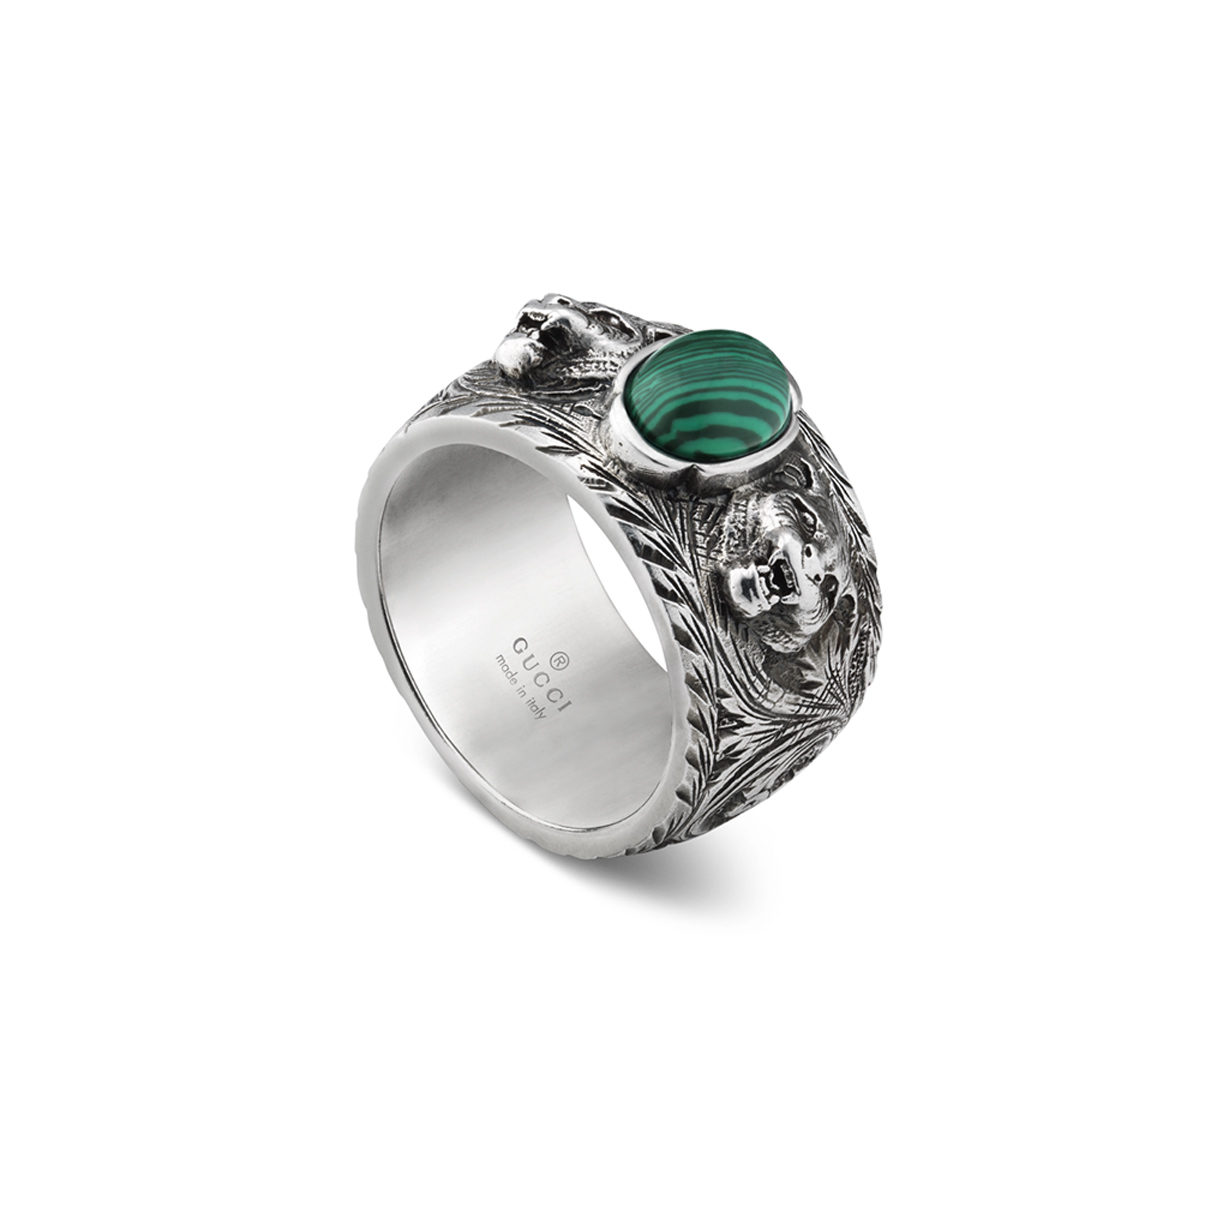 Gucci Garden Ring in Sterling Silver and Green Resin